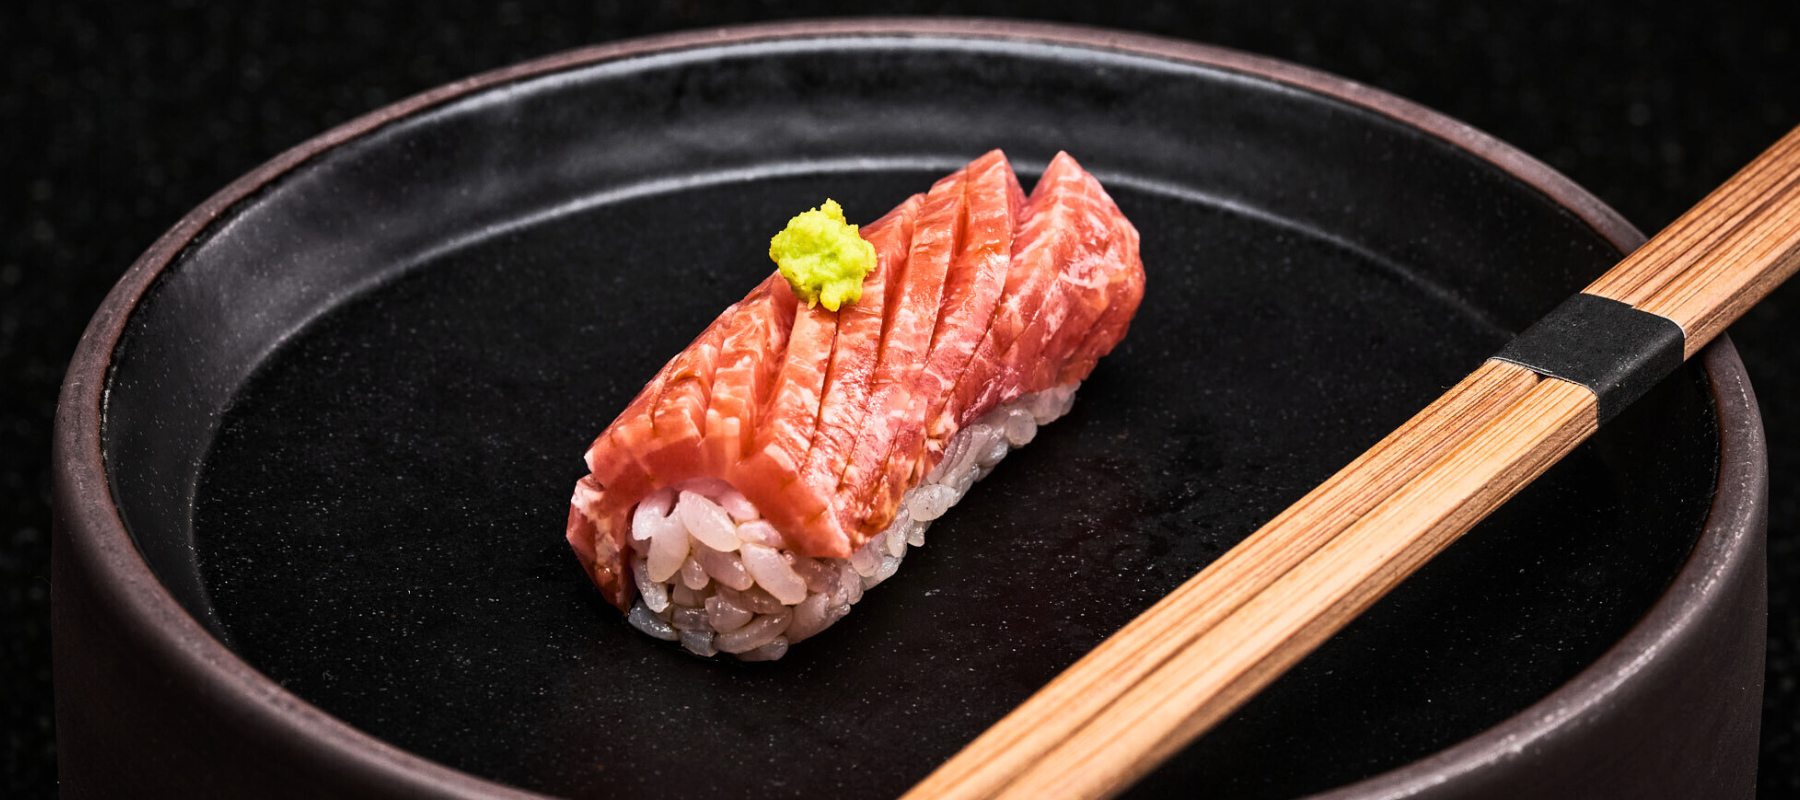 Cell-based seafood maker startup Wanda Fish unveils first cultivated bluefin tuna toro sashimi